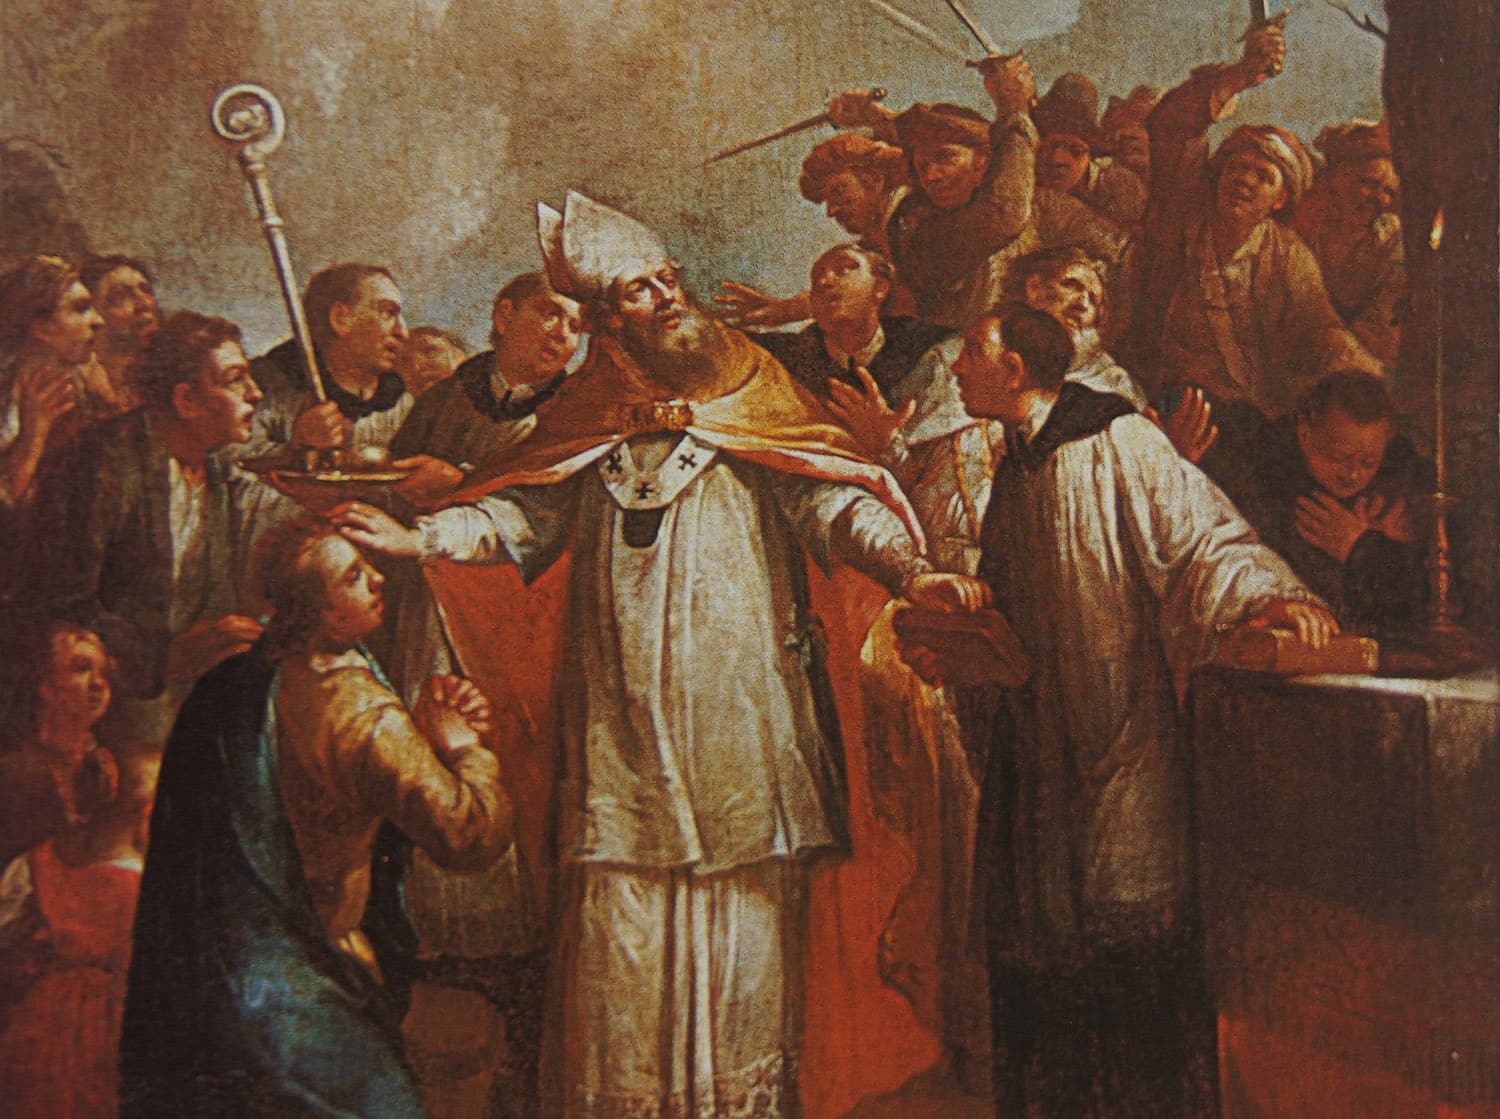 A painting of the martyrdom of St. Boniface